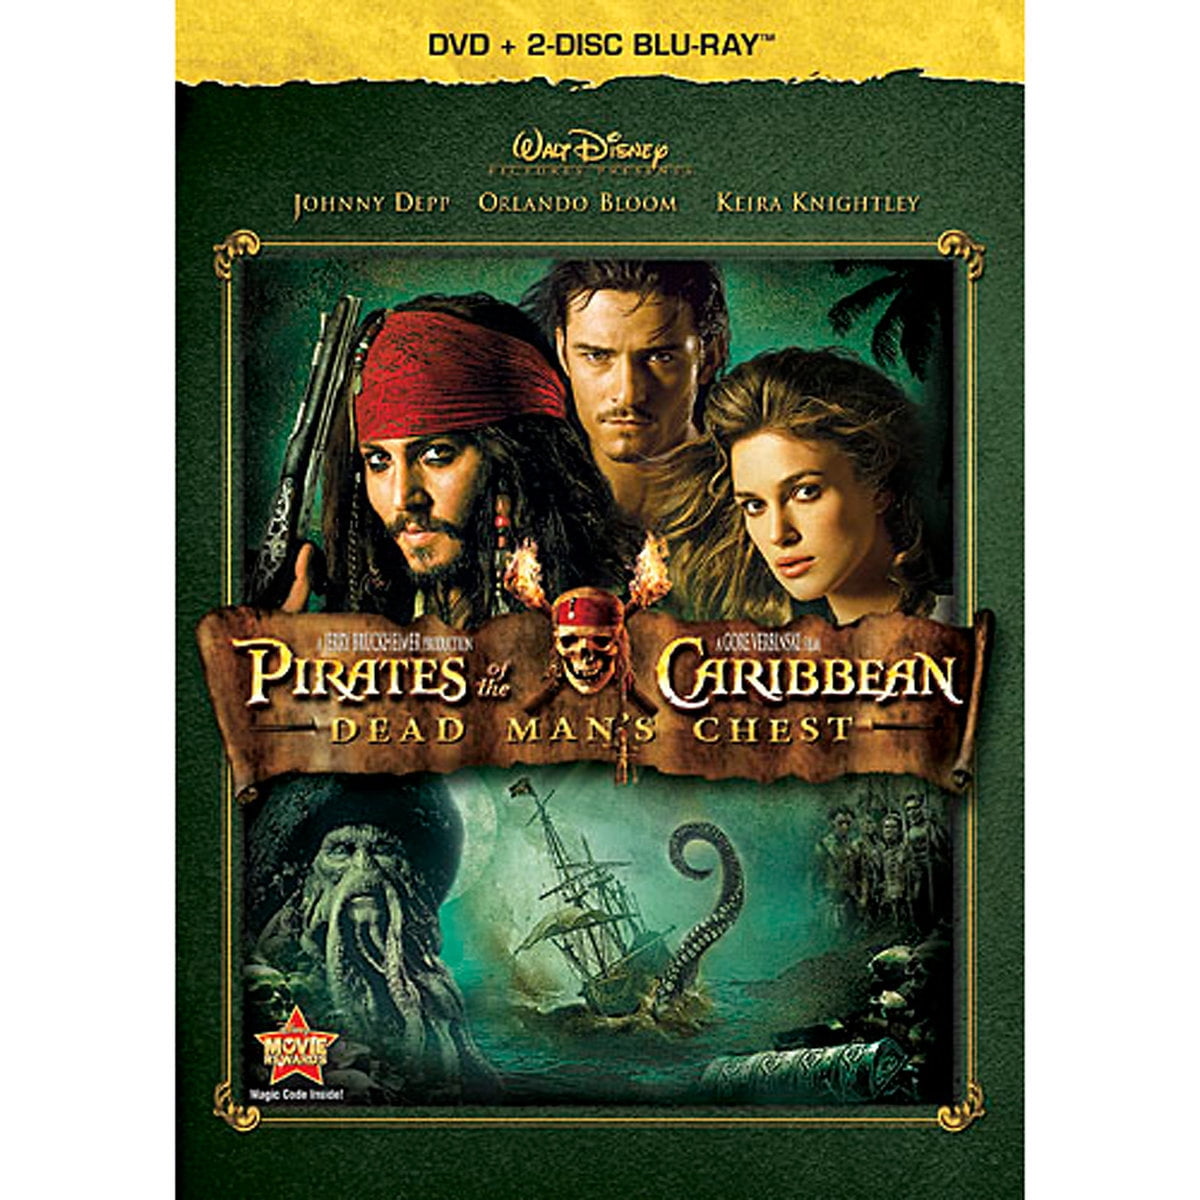 Pirates of the Caribbean: 5-Movie Collection [12] 4K UHD Box Set